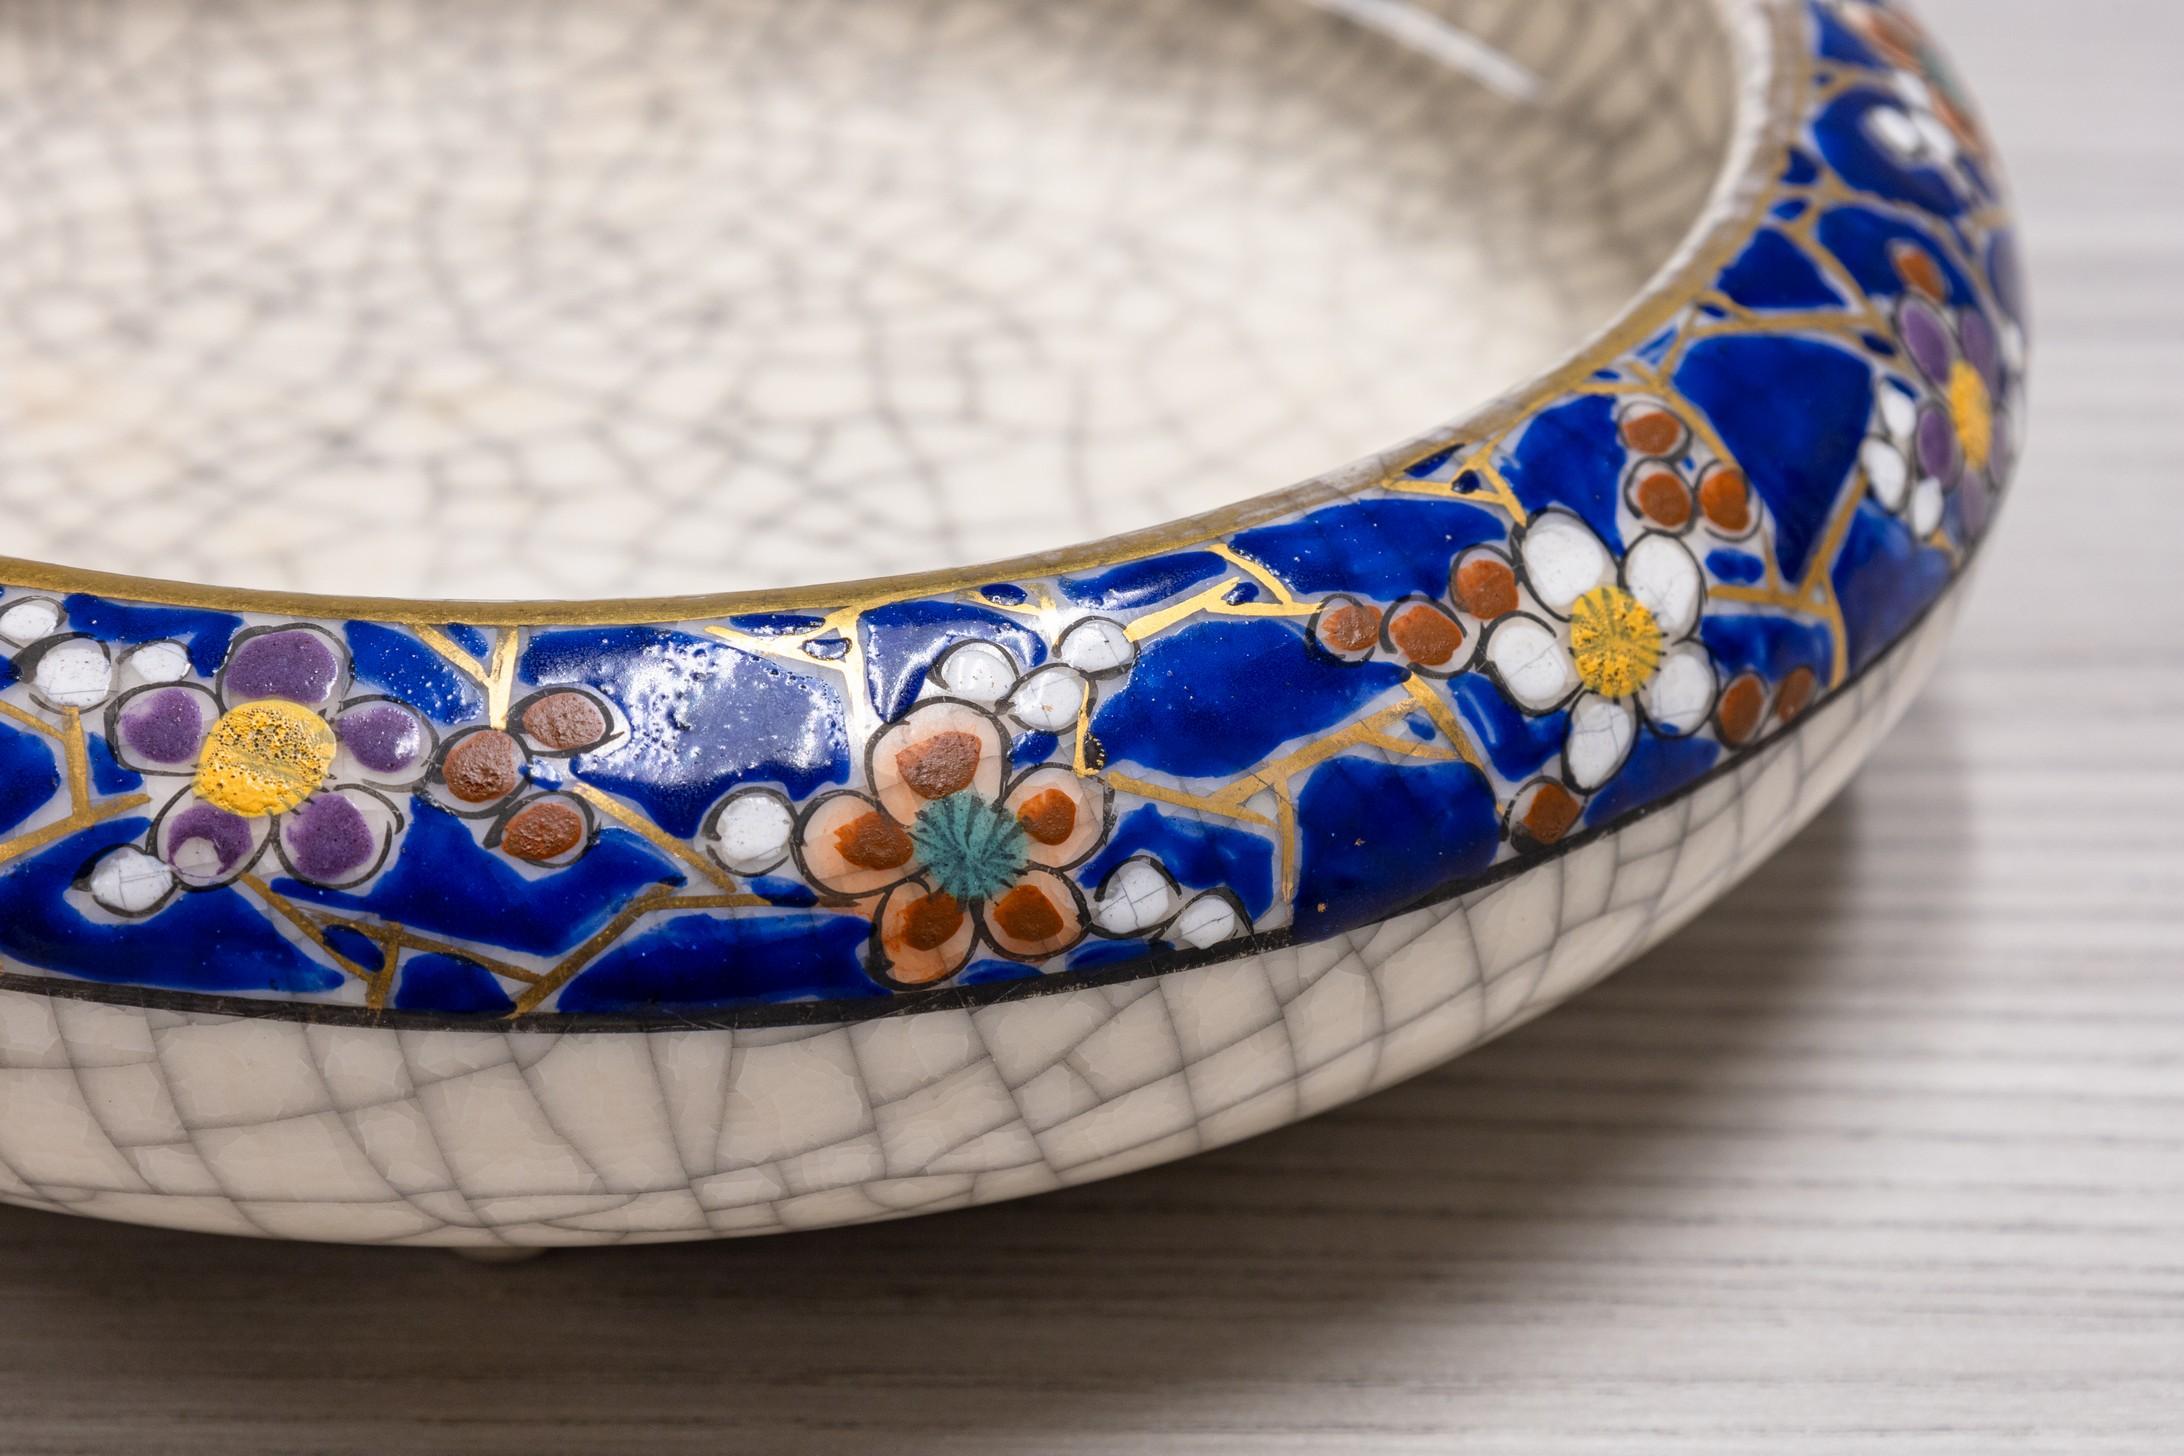 This is an antique Satsuma bowl, characterized by its rich cobalt blue glaze adorned with intricate gold and multicolor floral motifs. The bowl's interior features a delicate crackle glaze, showcasing the distinctive craftsmanship of traditional